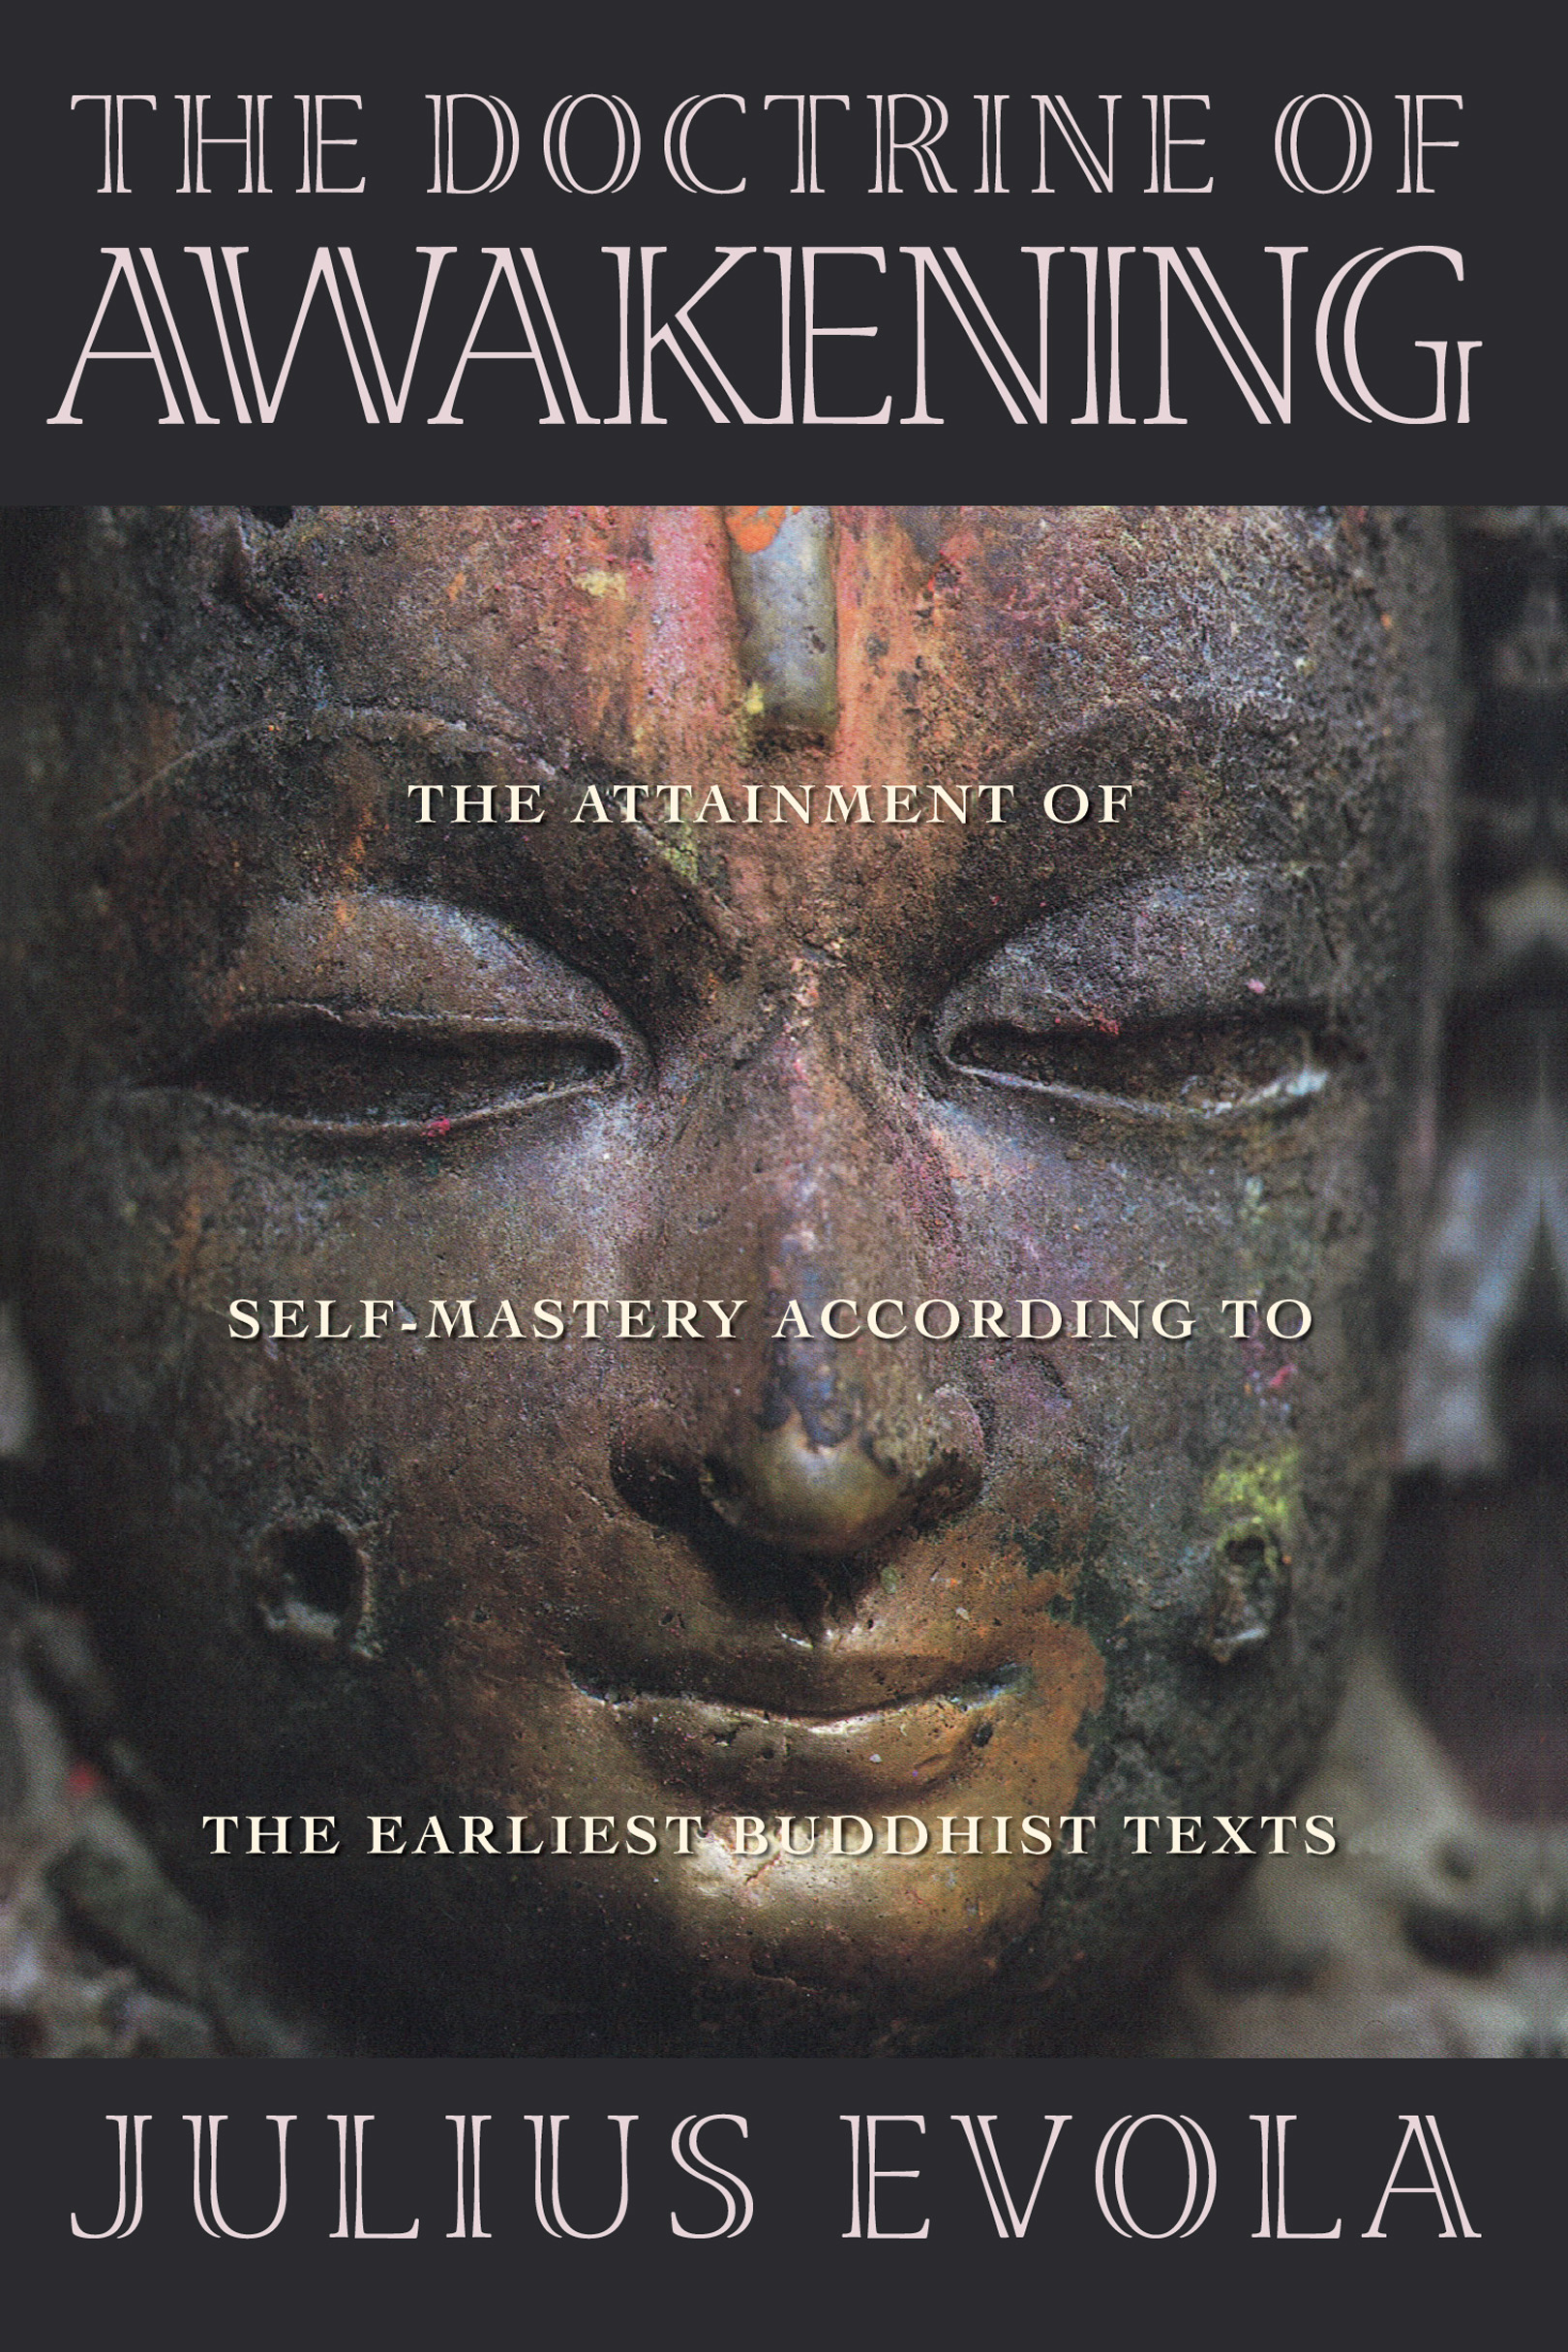 The doctrine of awakening the attainment of self-mastery according to the earliest buddhist texts - image 1